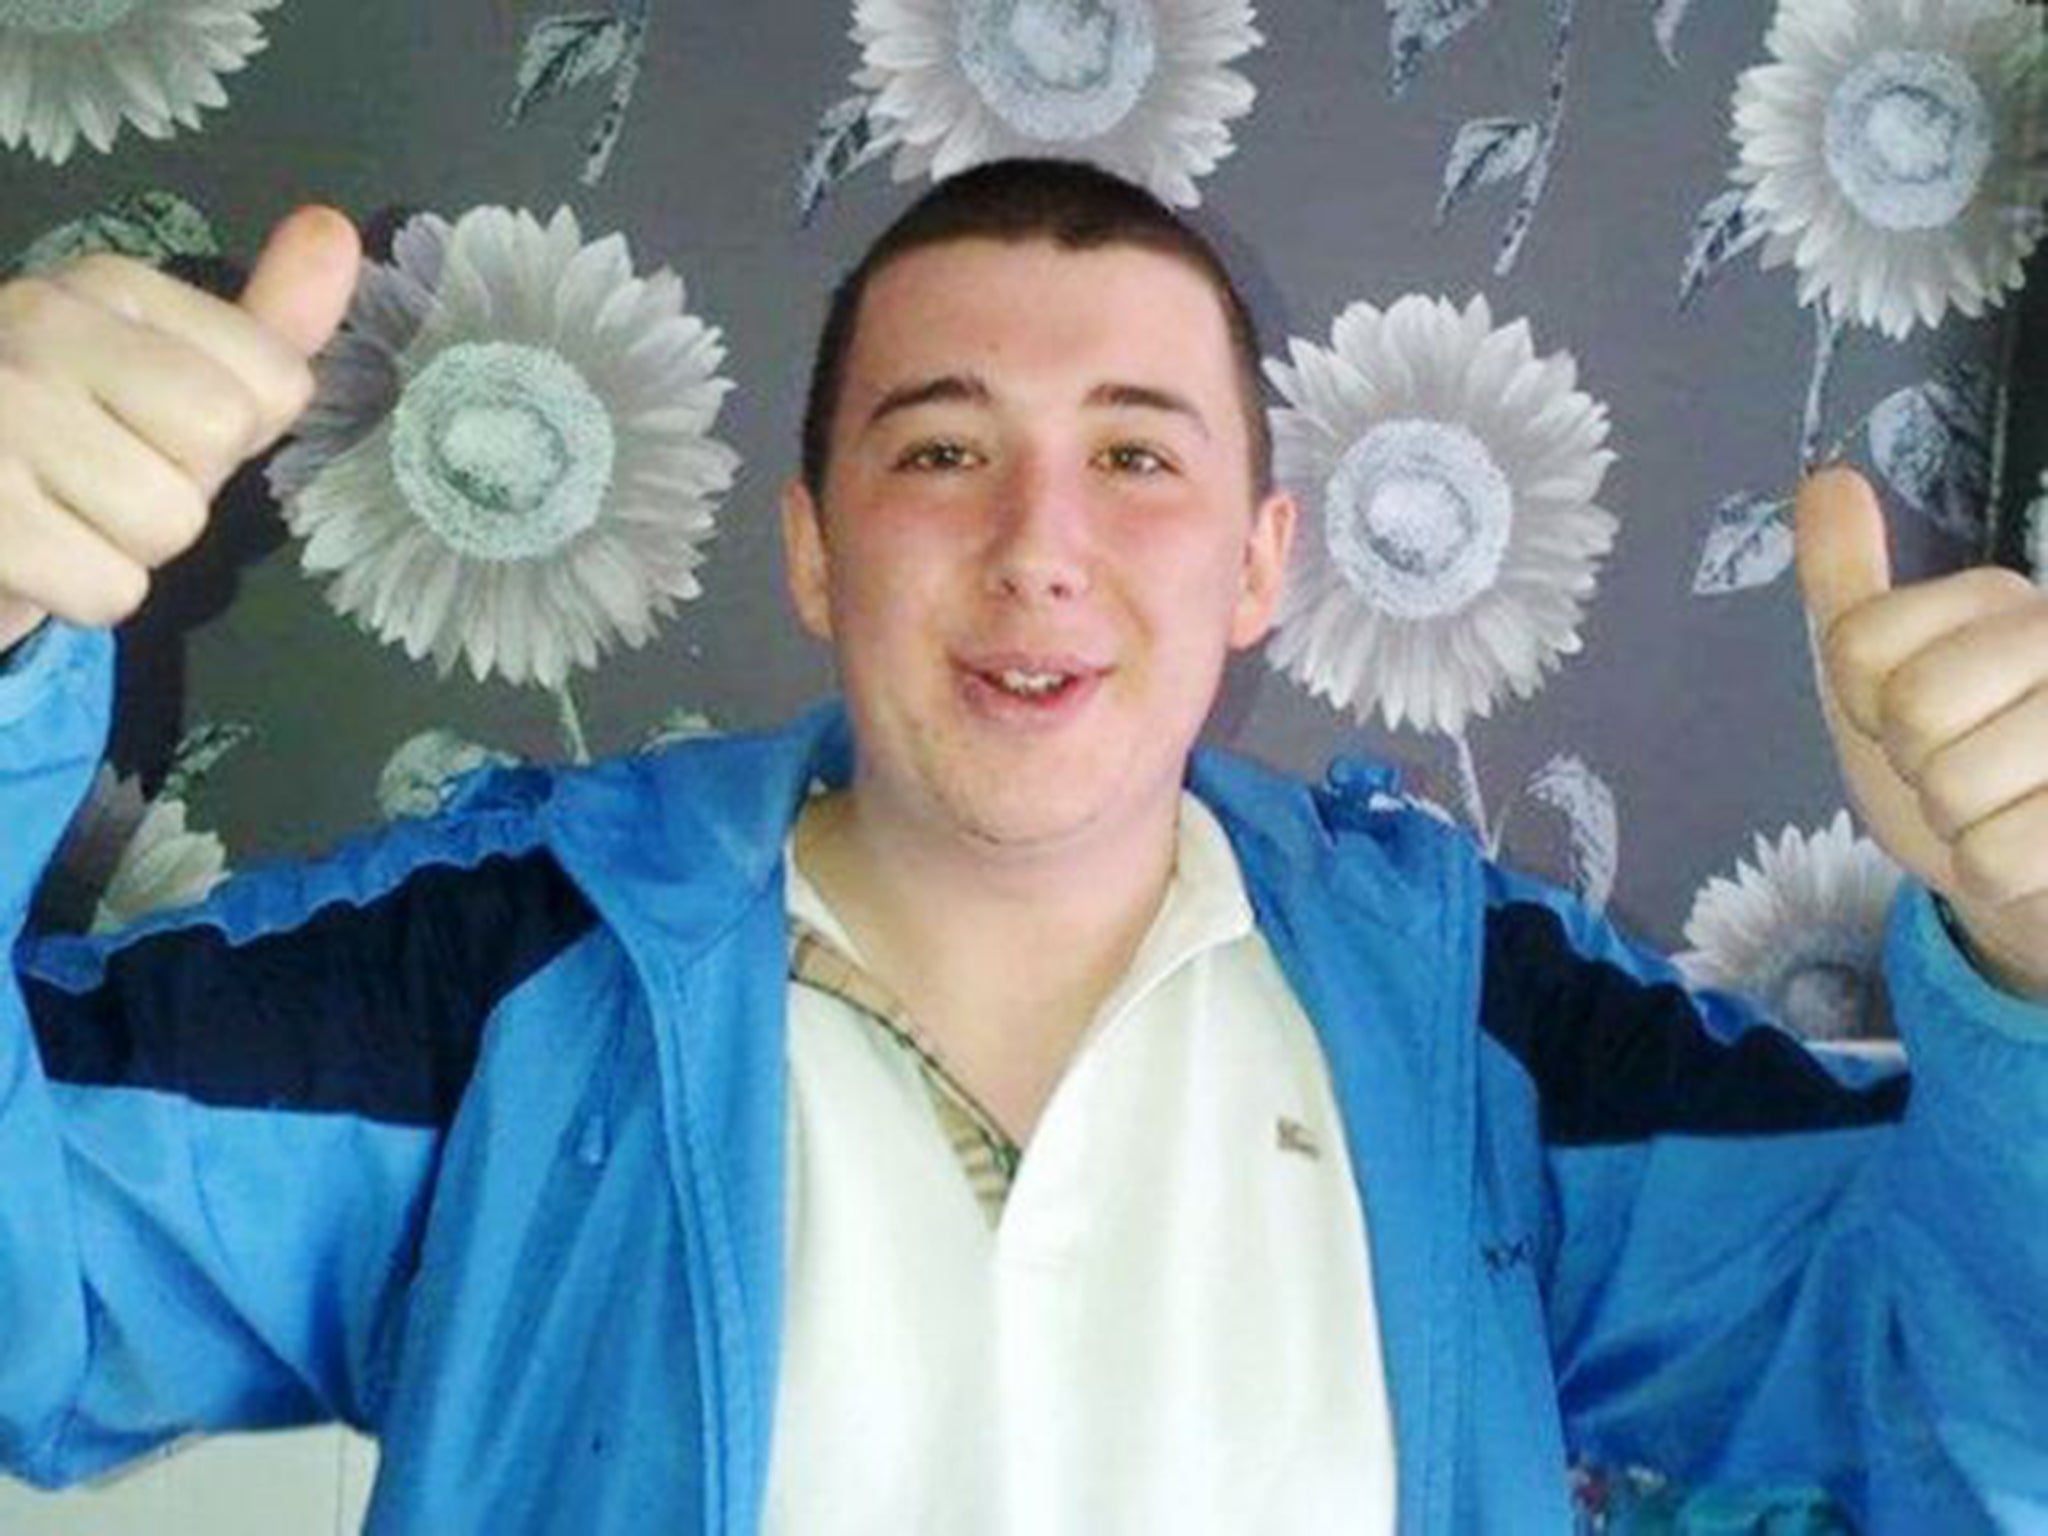 Police are treating the death of Lee Irving, 24, as a disability-related hate crime. Six people have been arrested on suspicion of his murder in Fawdon, Newcastle